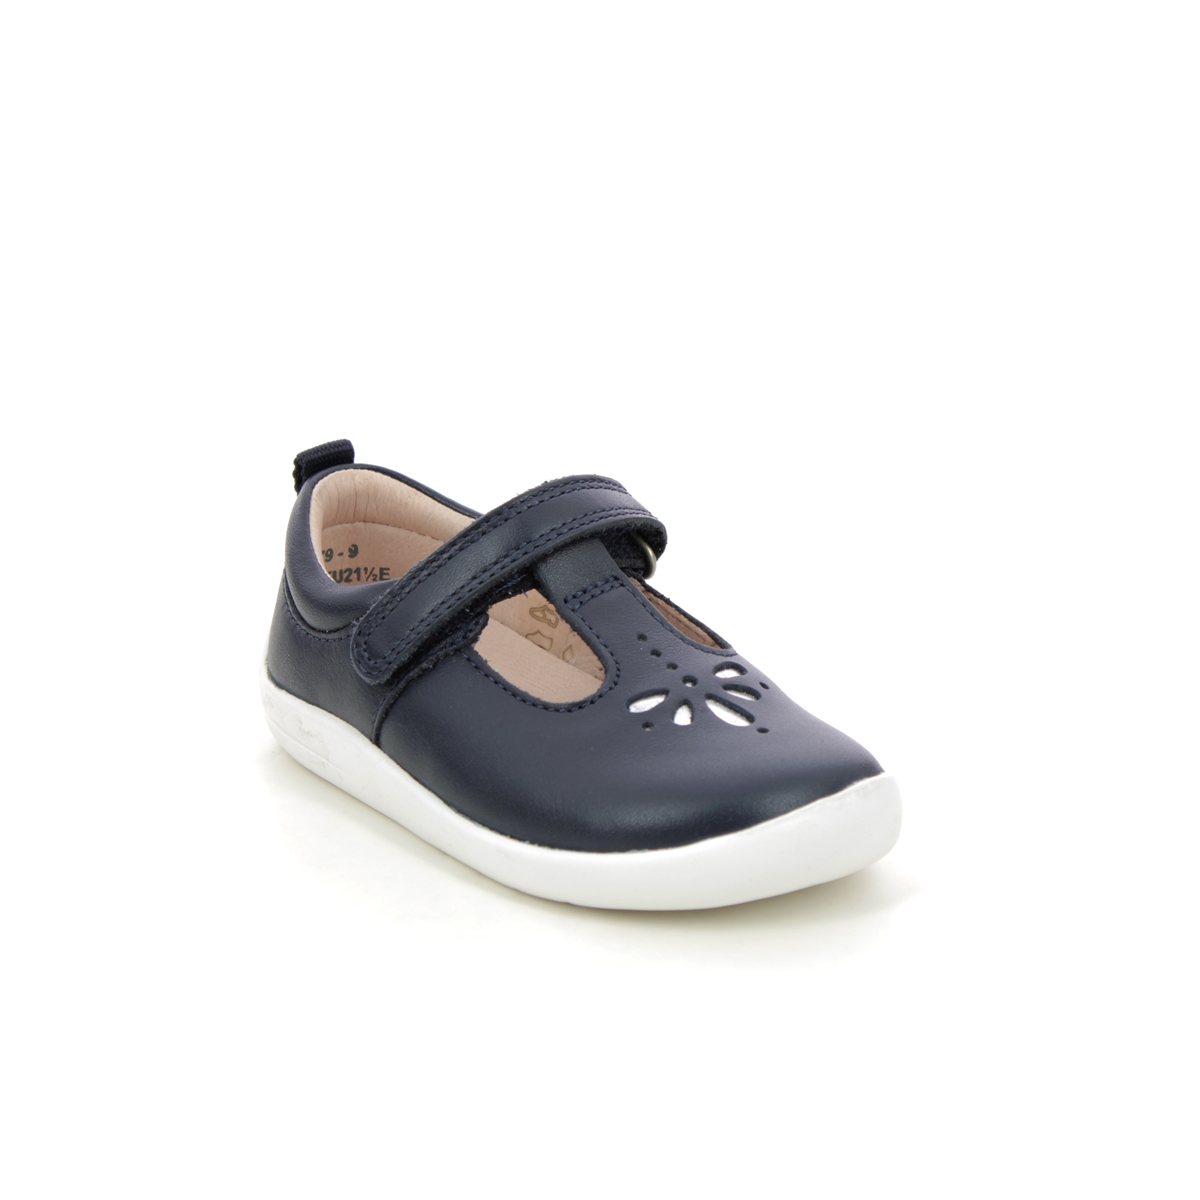 Start Rite Puzzle Navy Leather Kids first shoes 0779-95E in a Plain Leather in Size 5